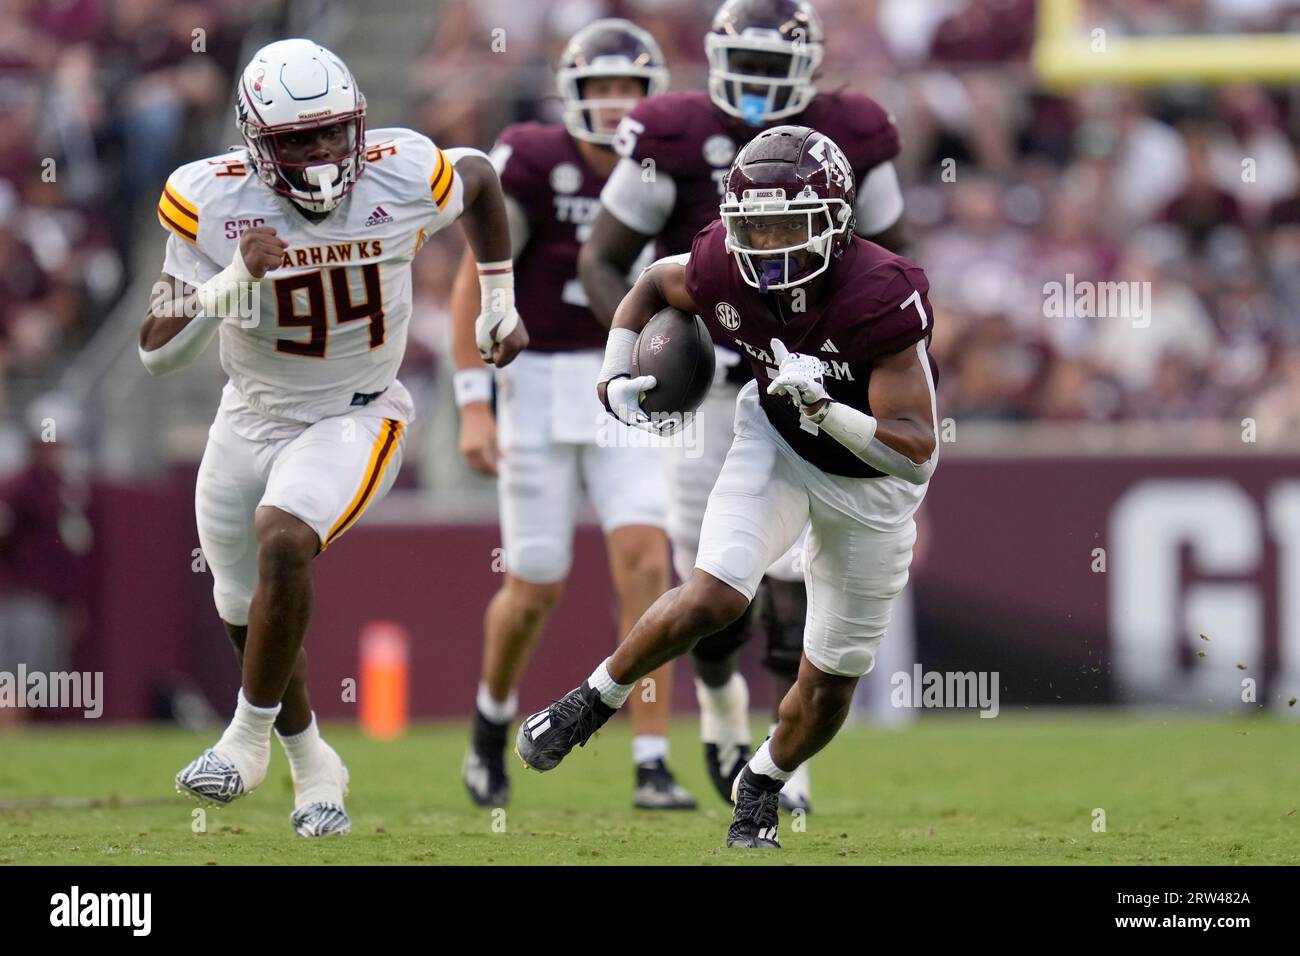 Texas AandM wide receiver Moose Muhammad III (7) breaks free for a first down after a catch against Louisiana-Monroe during the second half of an NCAA college football game Saturday, Sept